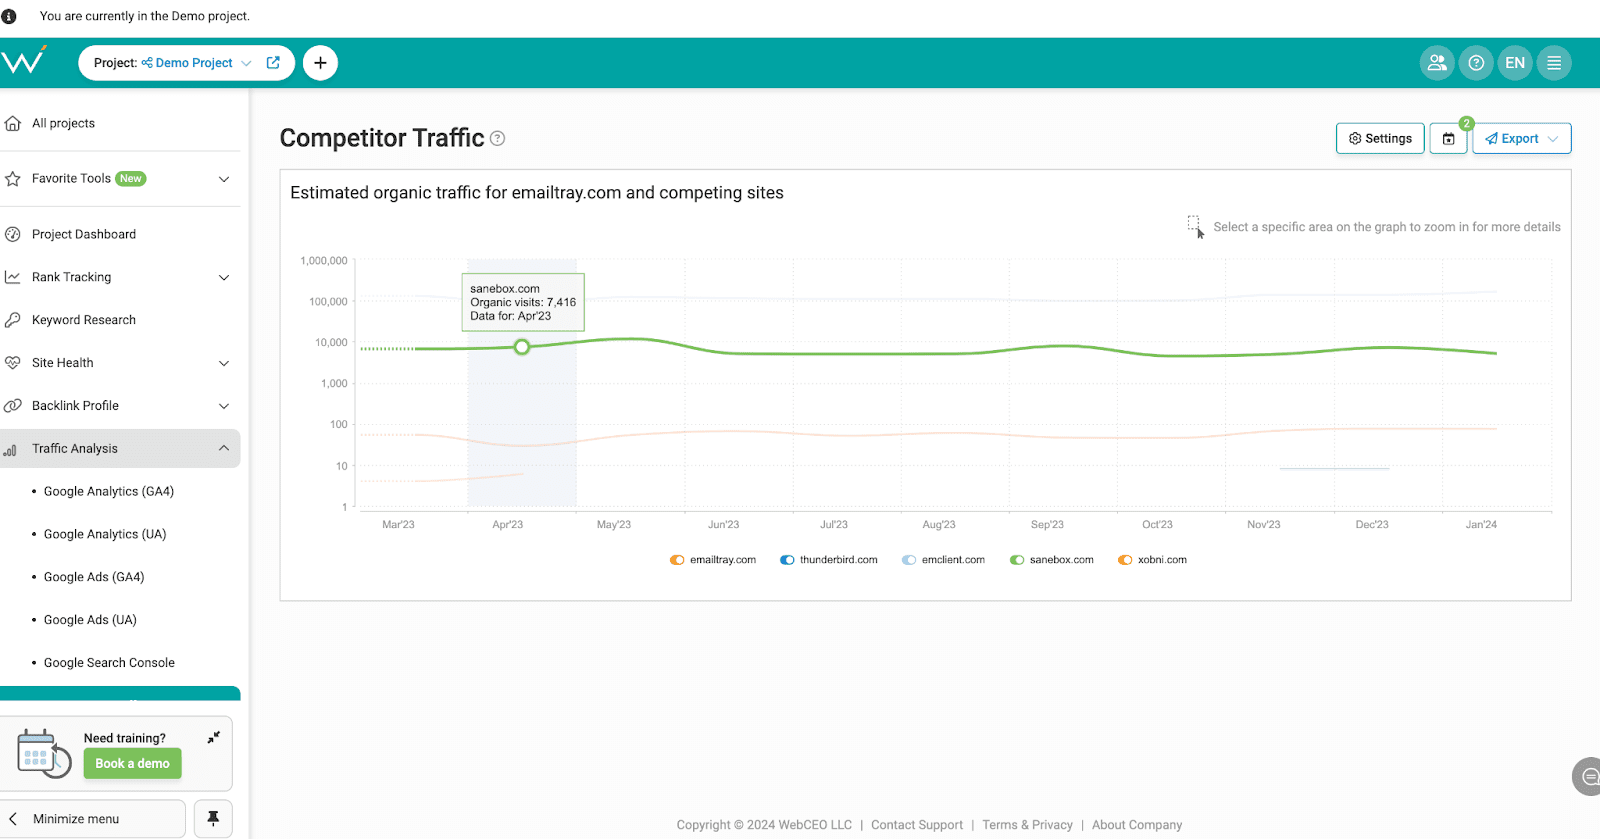 Check competitor traffic in WebCEO